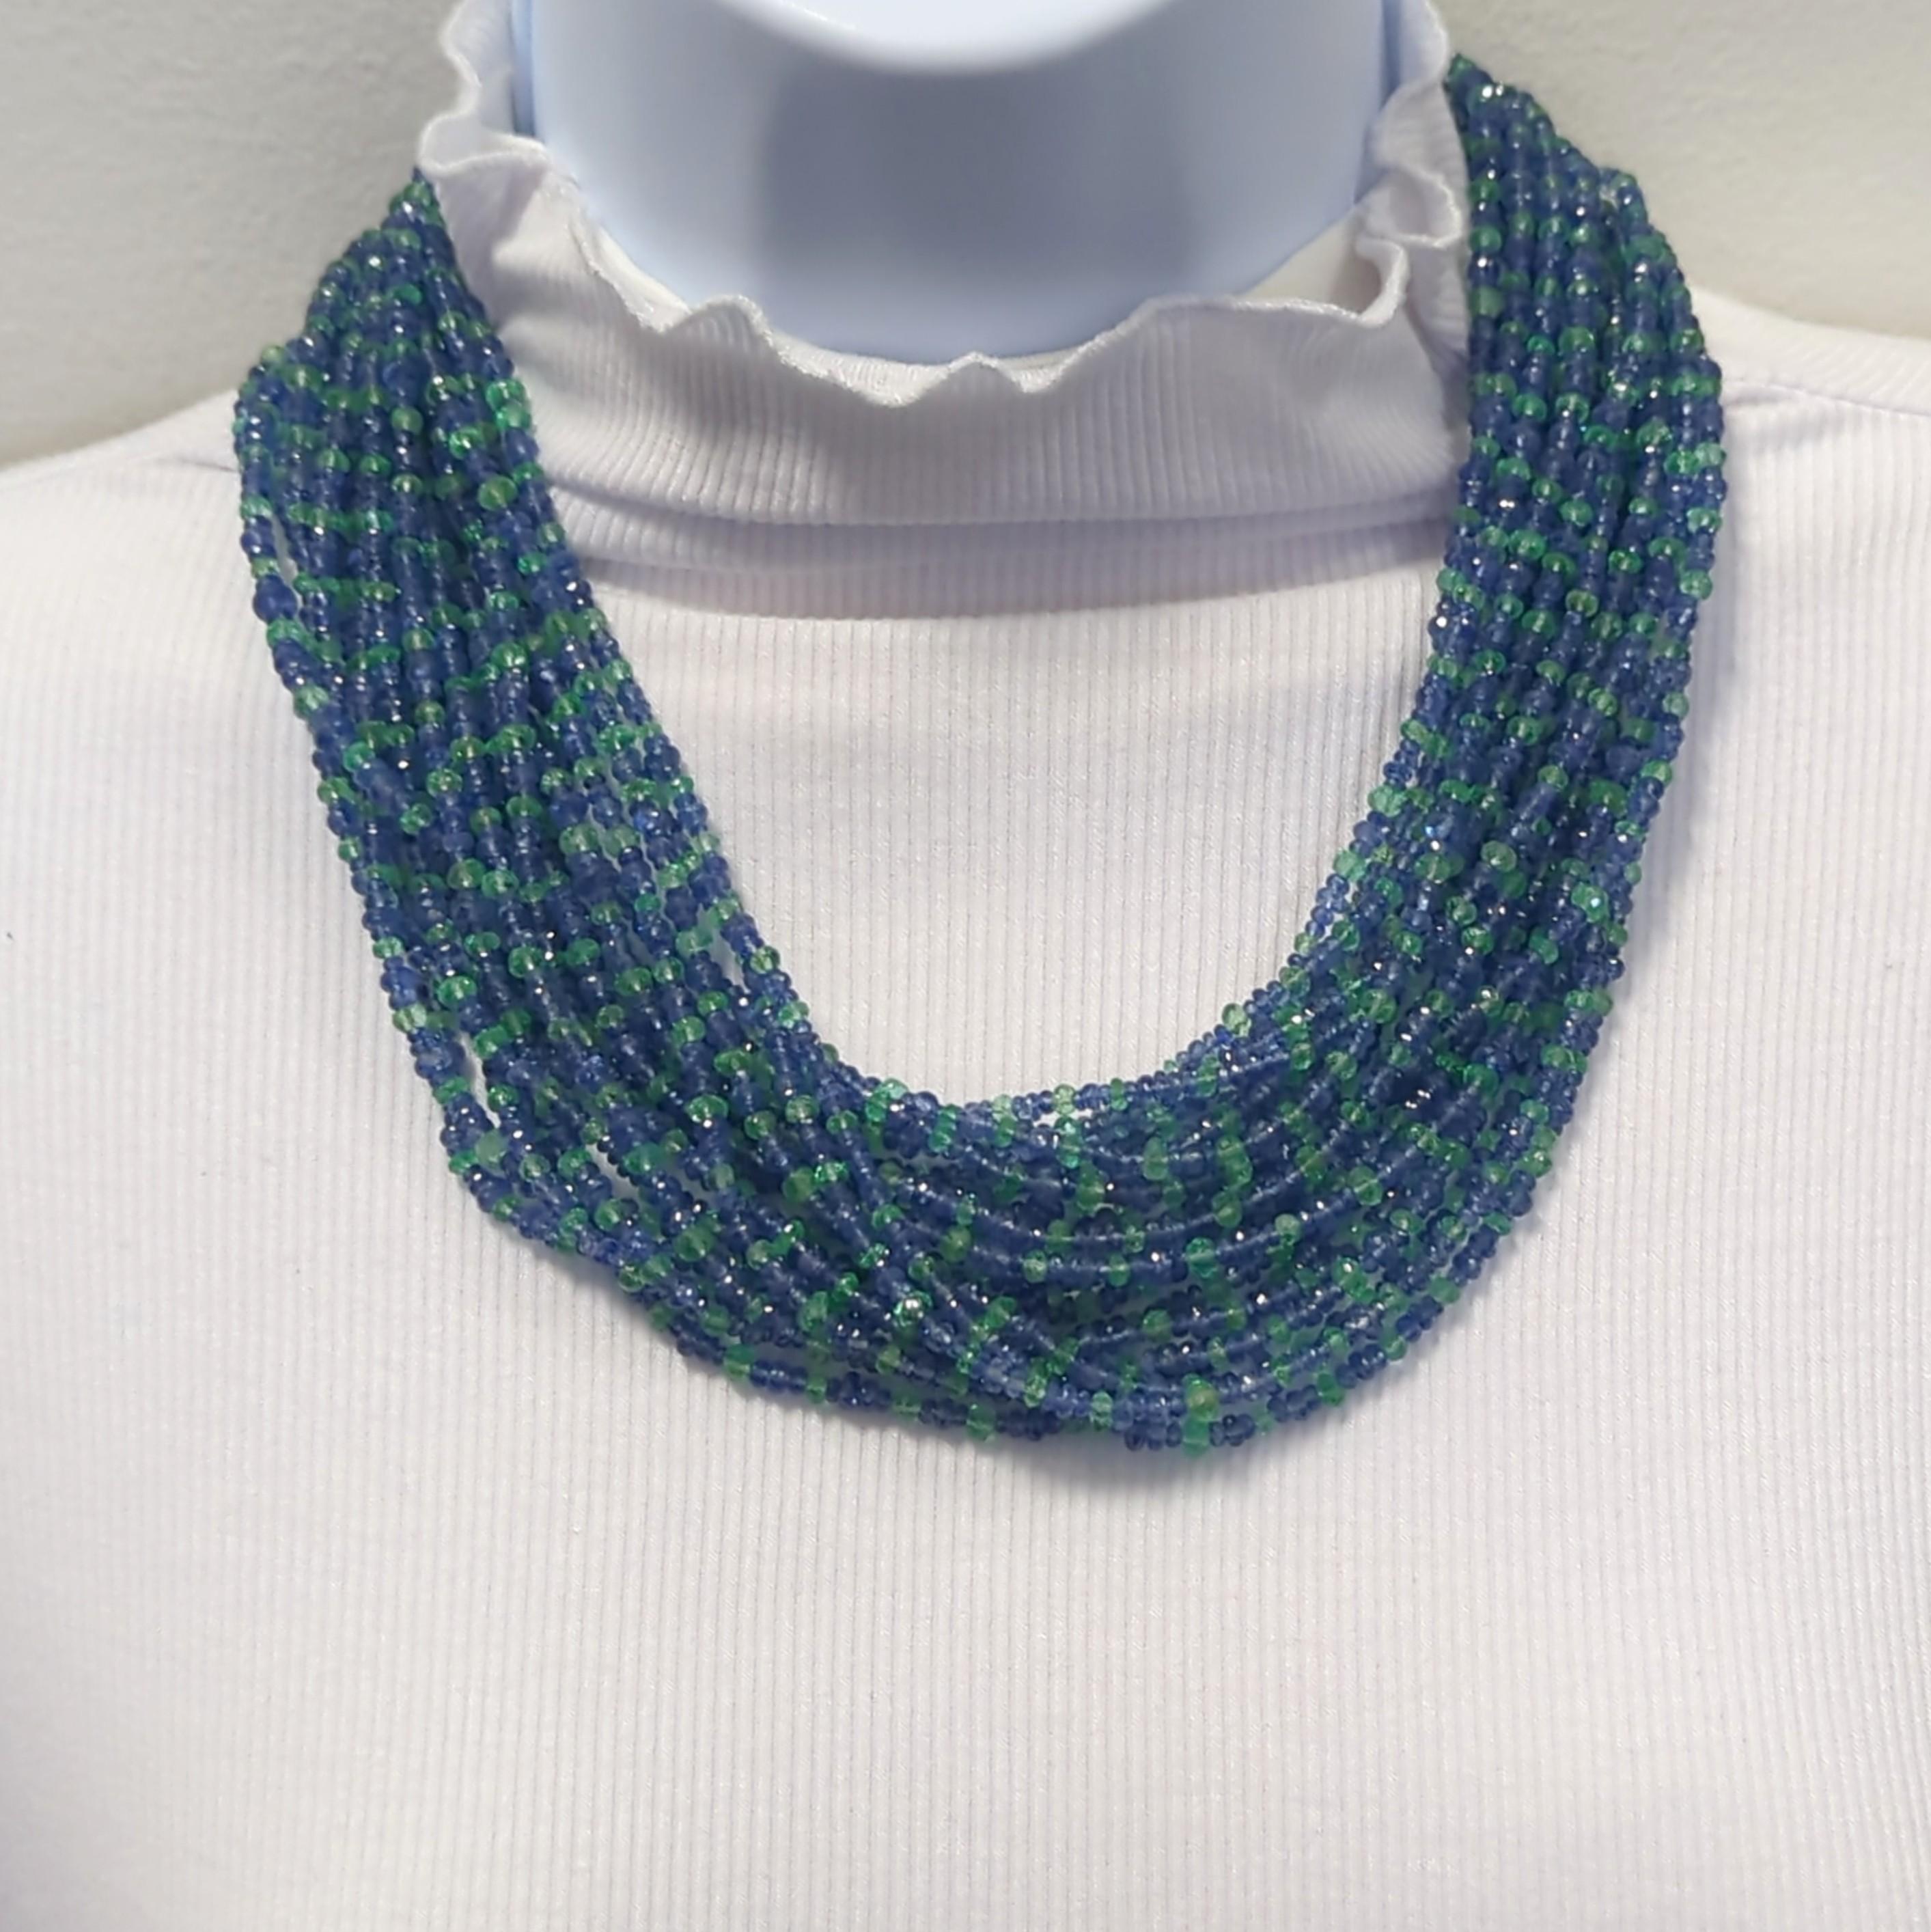 Absolutely stunning 307.15 ct. Colombian emerald beads with 936.29 ct. Ceylon blue sapphire beads with a carefully handcrafted clasp in 18k yellow gold.  The clasp has more blue sapphire beads, emerald beads, and white diamond rounds.  This necklace